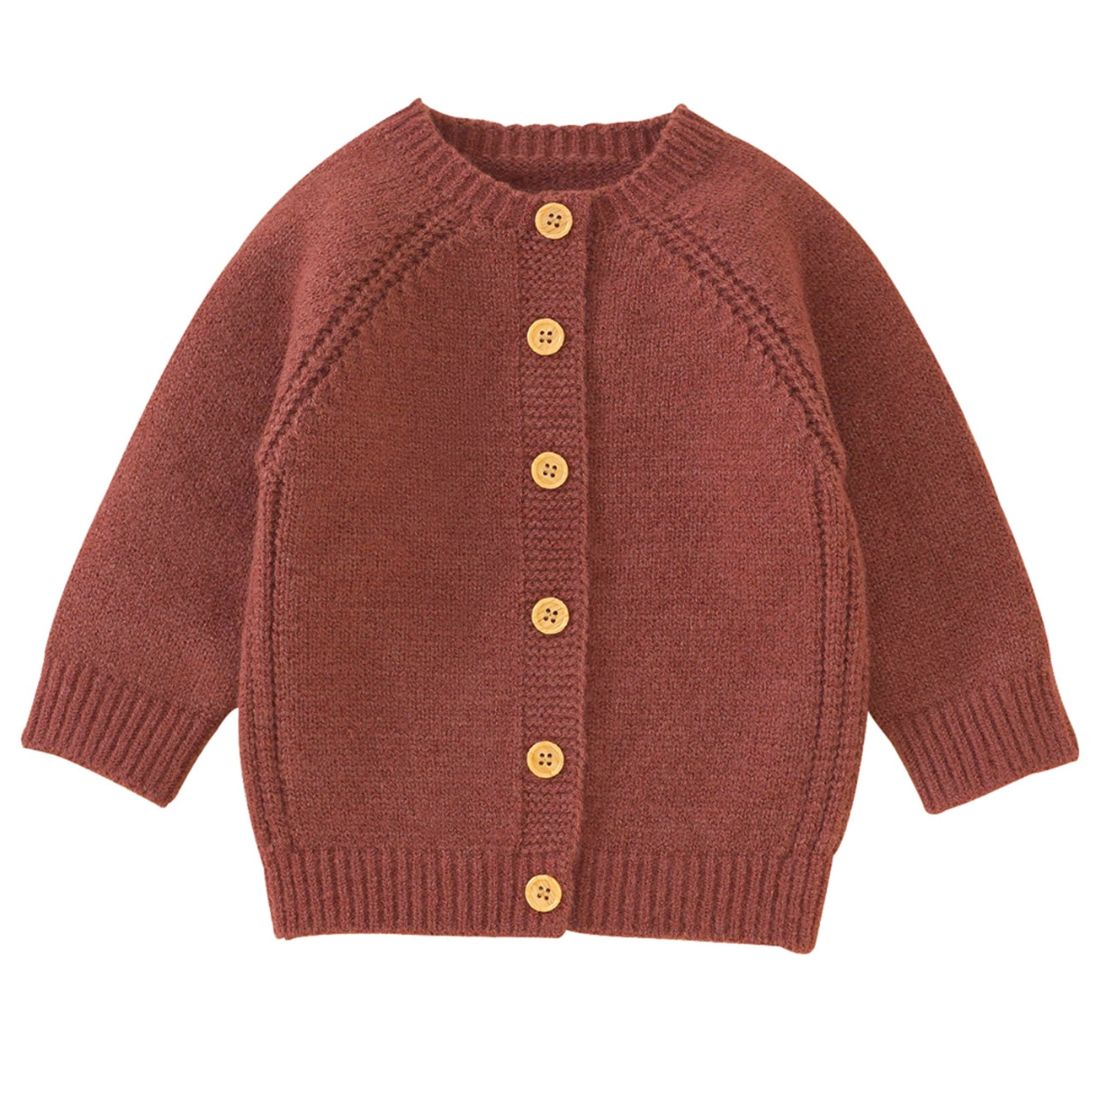 One Line Knit Baby Cardigan - My Trendy Youngsters | Buy on-trend and stylish Baby and Toddler Winter Threads @ My Trendy Youngsters - Dress your little one in Style @ My Trendy Youngsters 